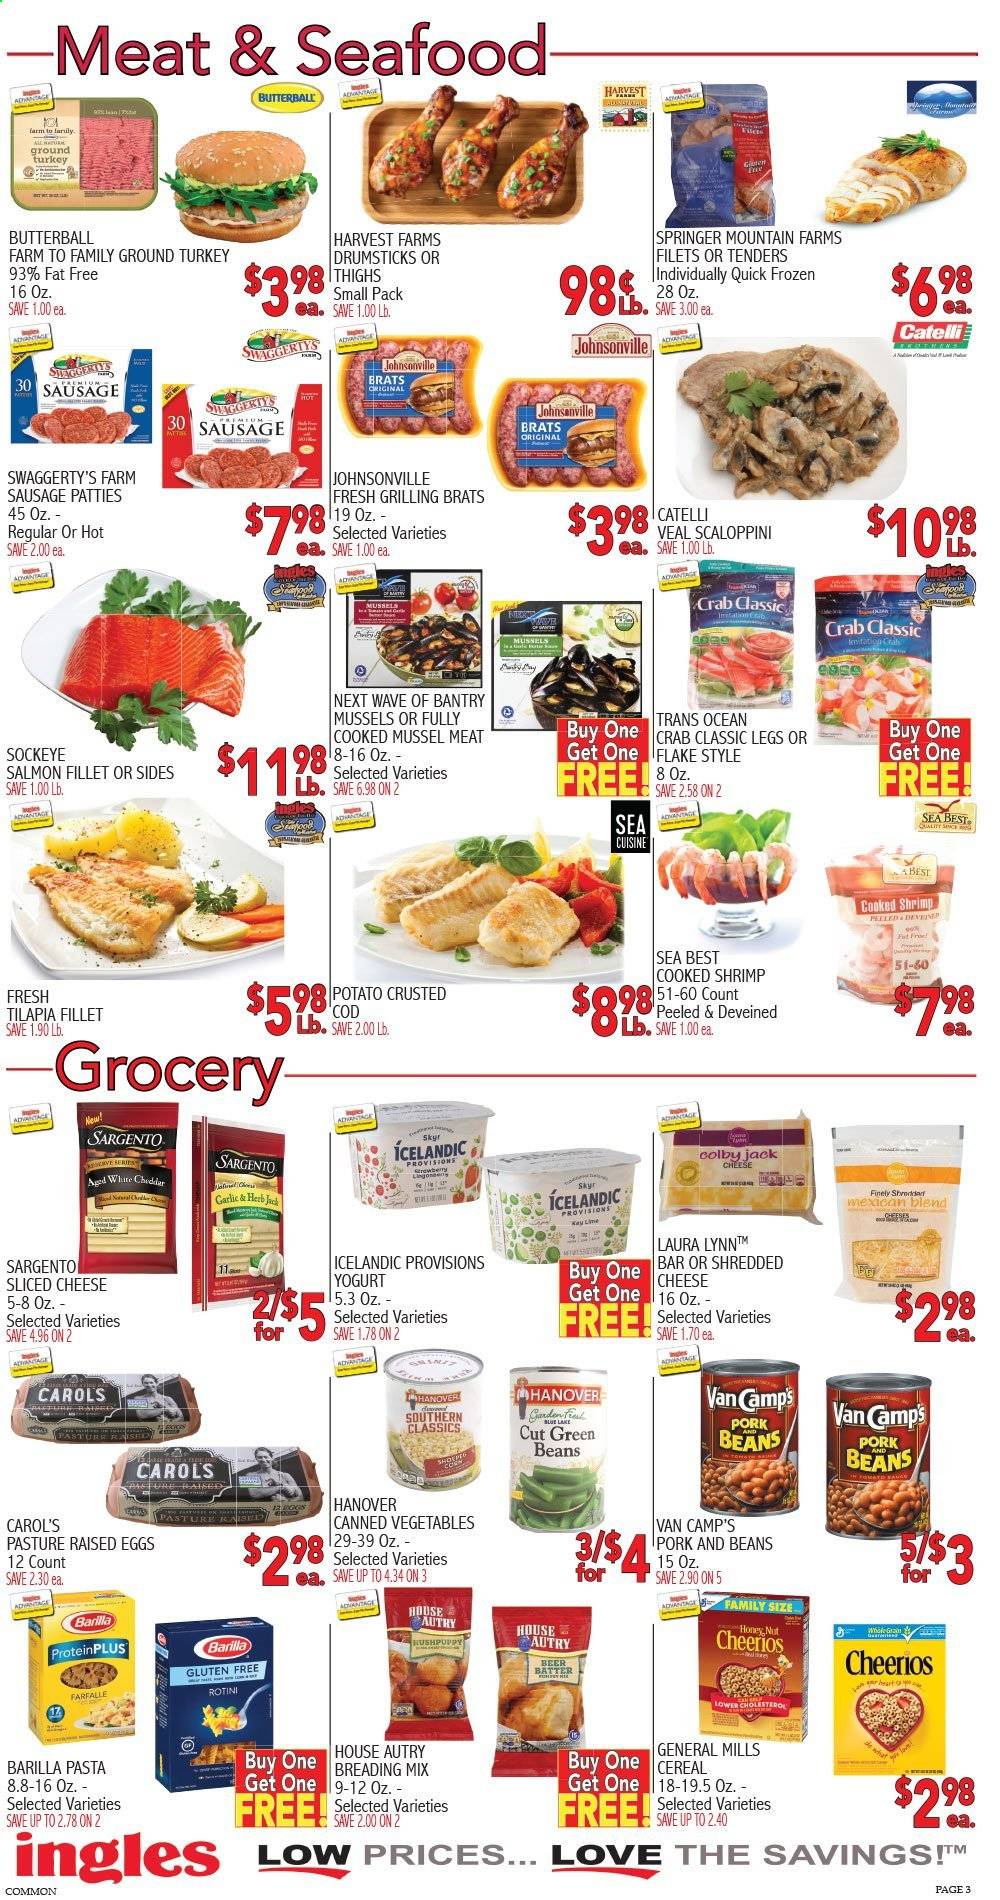 thumbnail - Ingles Flyer - 02/24/2021 - 03/02/2021 - Sales products - green beans, Johnsonville, cod, mussels, salmon, salmon fillet, tilapia, seafood, crab, shrimps, Barilla, sausage, Colby cheese, shredded cheese, sliced cheese, cheddar, Sargento, yoghurt, eggs, beans, canned vegetables, cereals, Cheerios, pasta, beer, Butterball, ground turkey. Page 3.